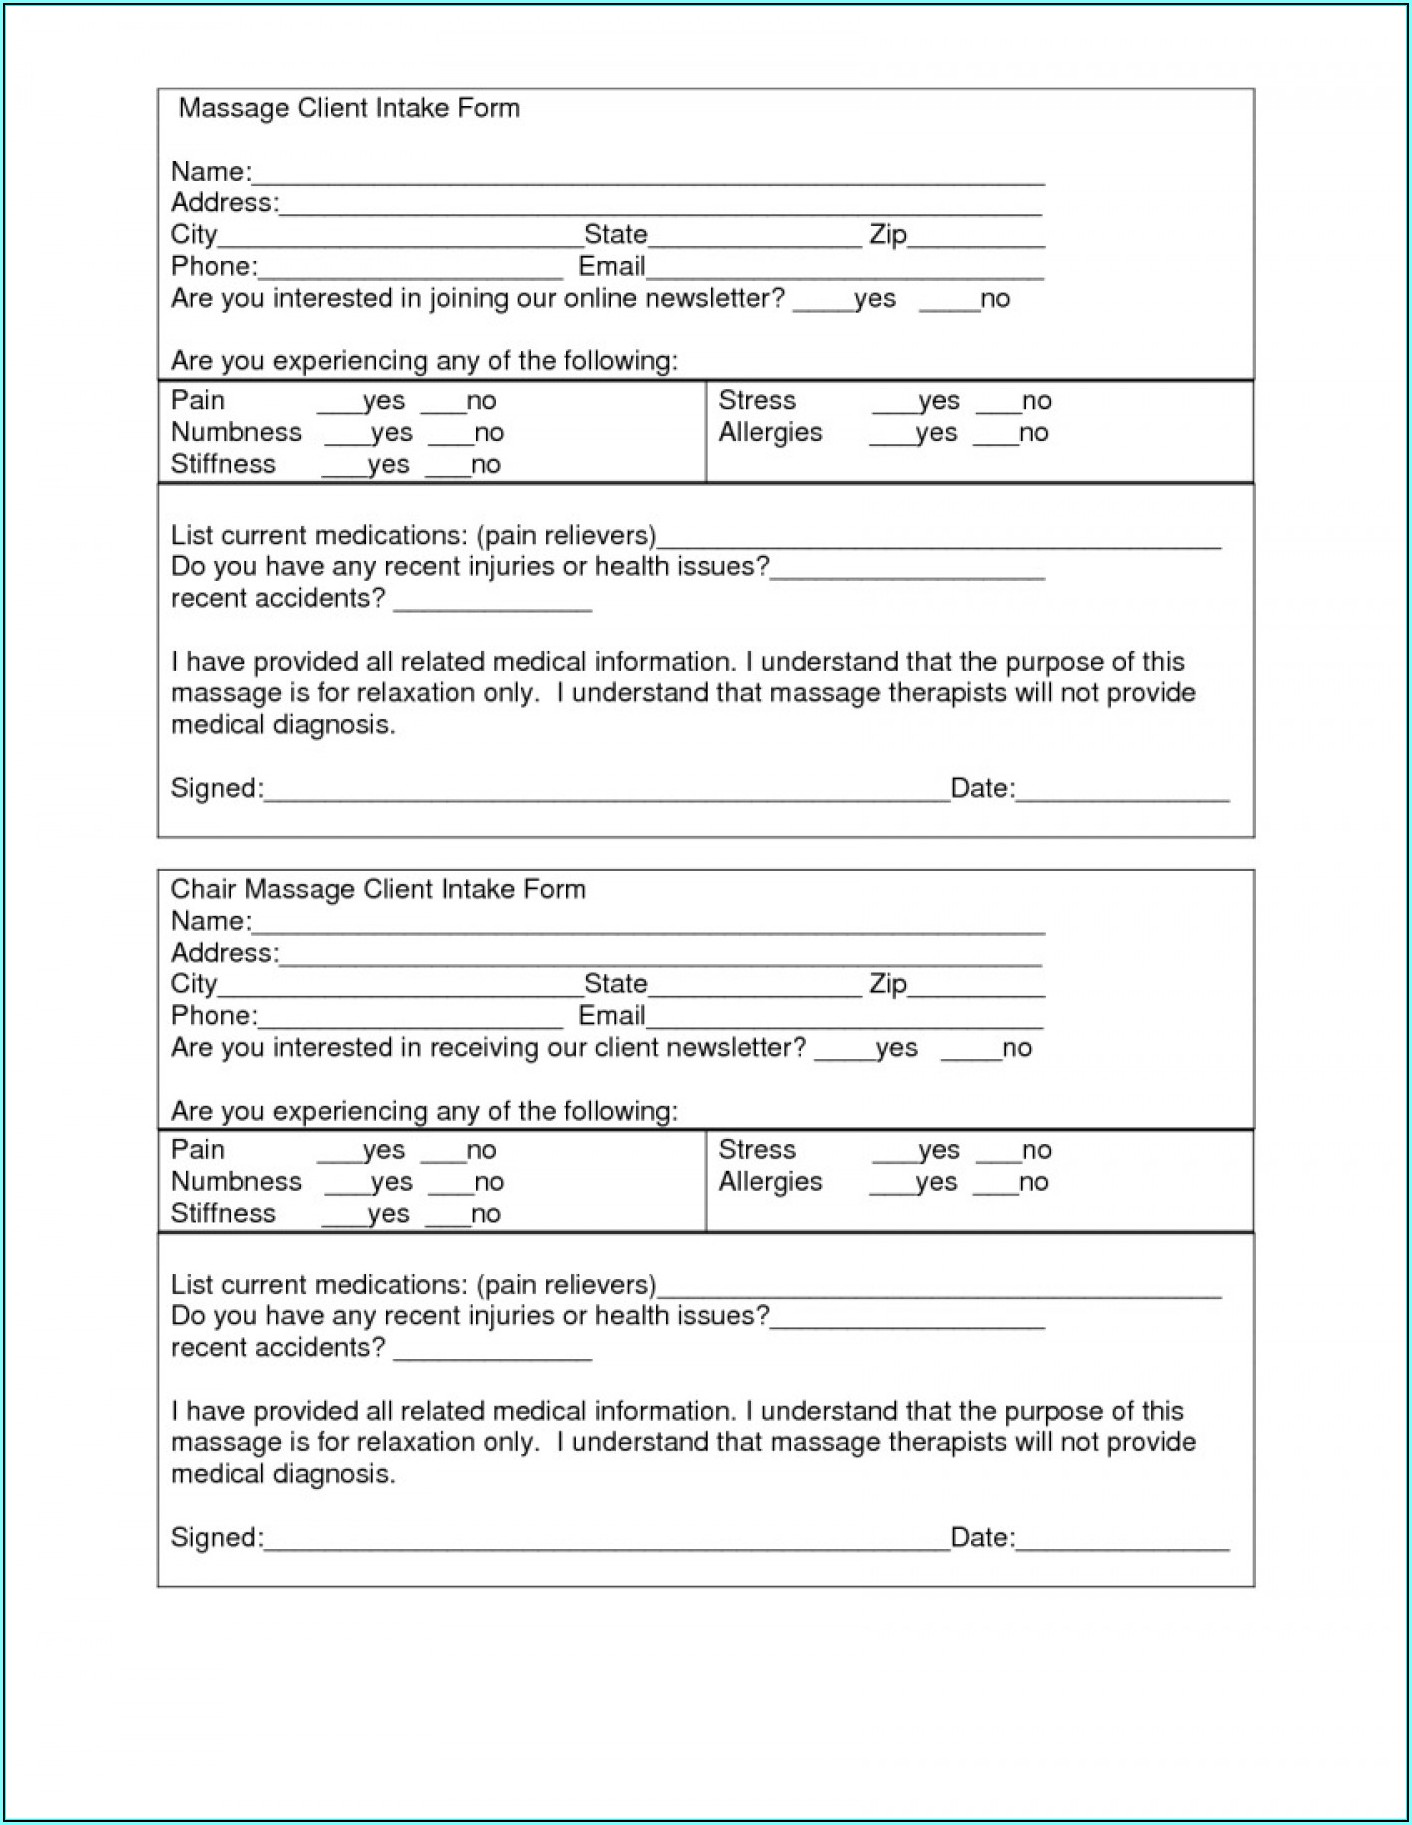 Client Intake Form Career Counseling